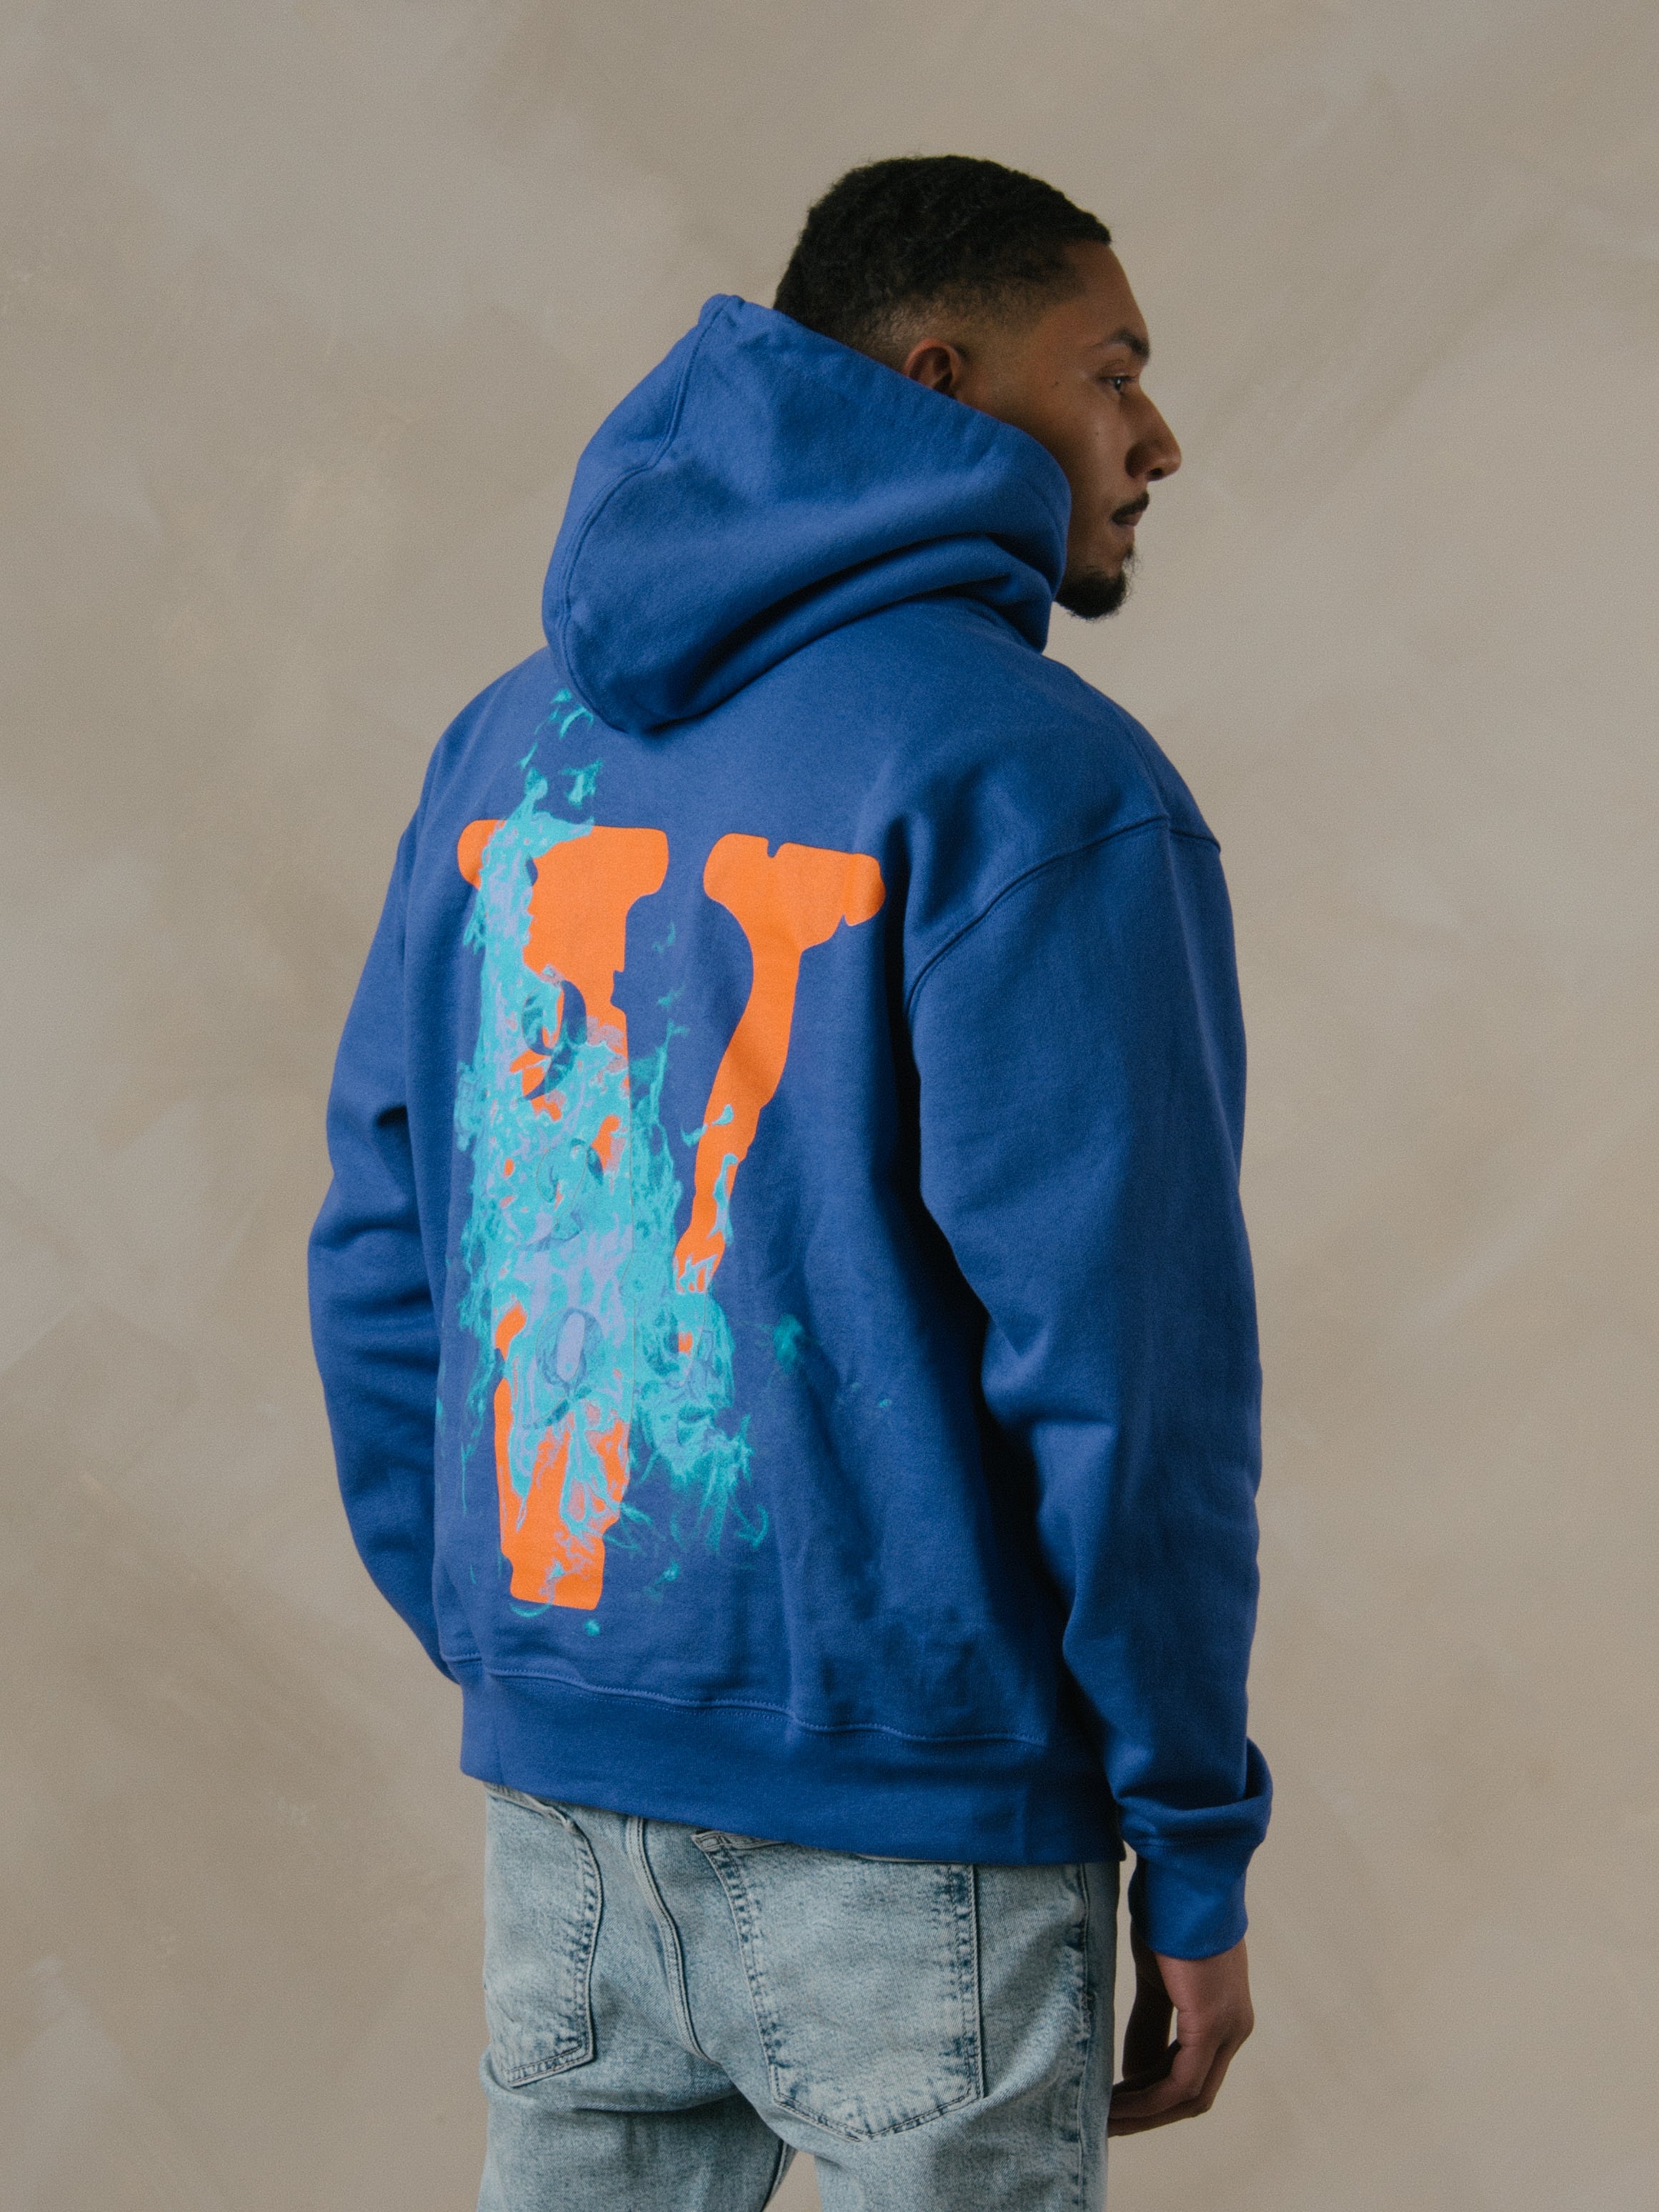 VLONE CLOTHING COLLECTION – ONE OF A KIND